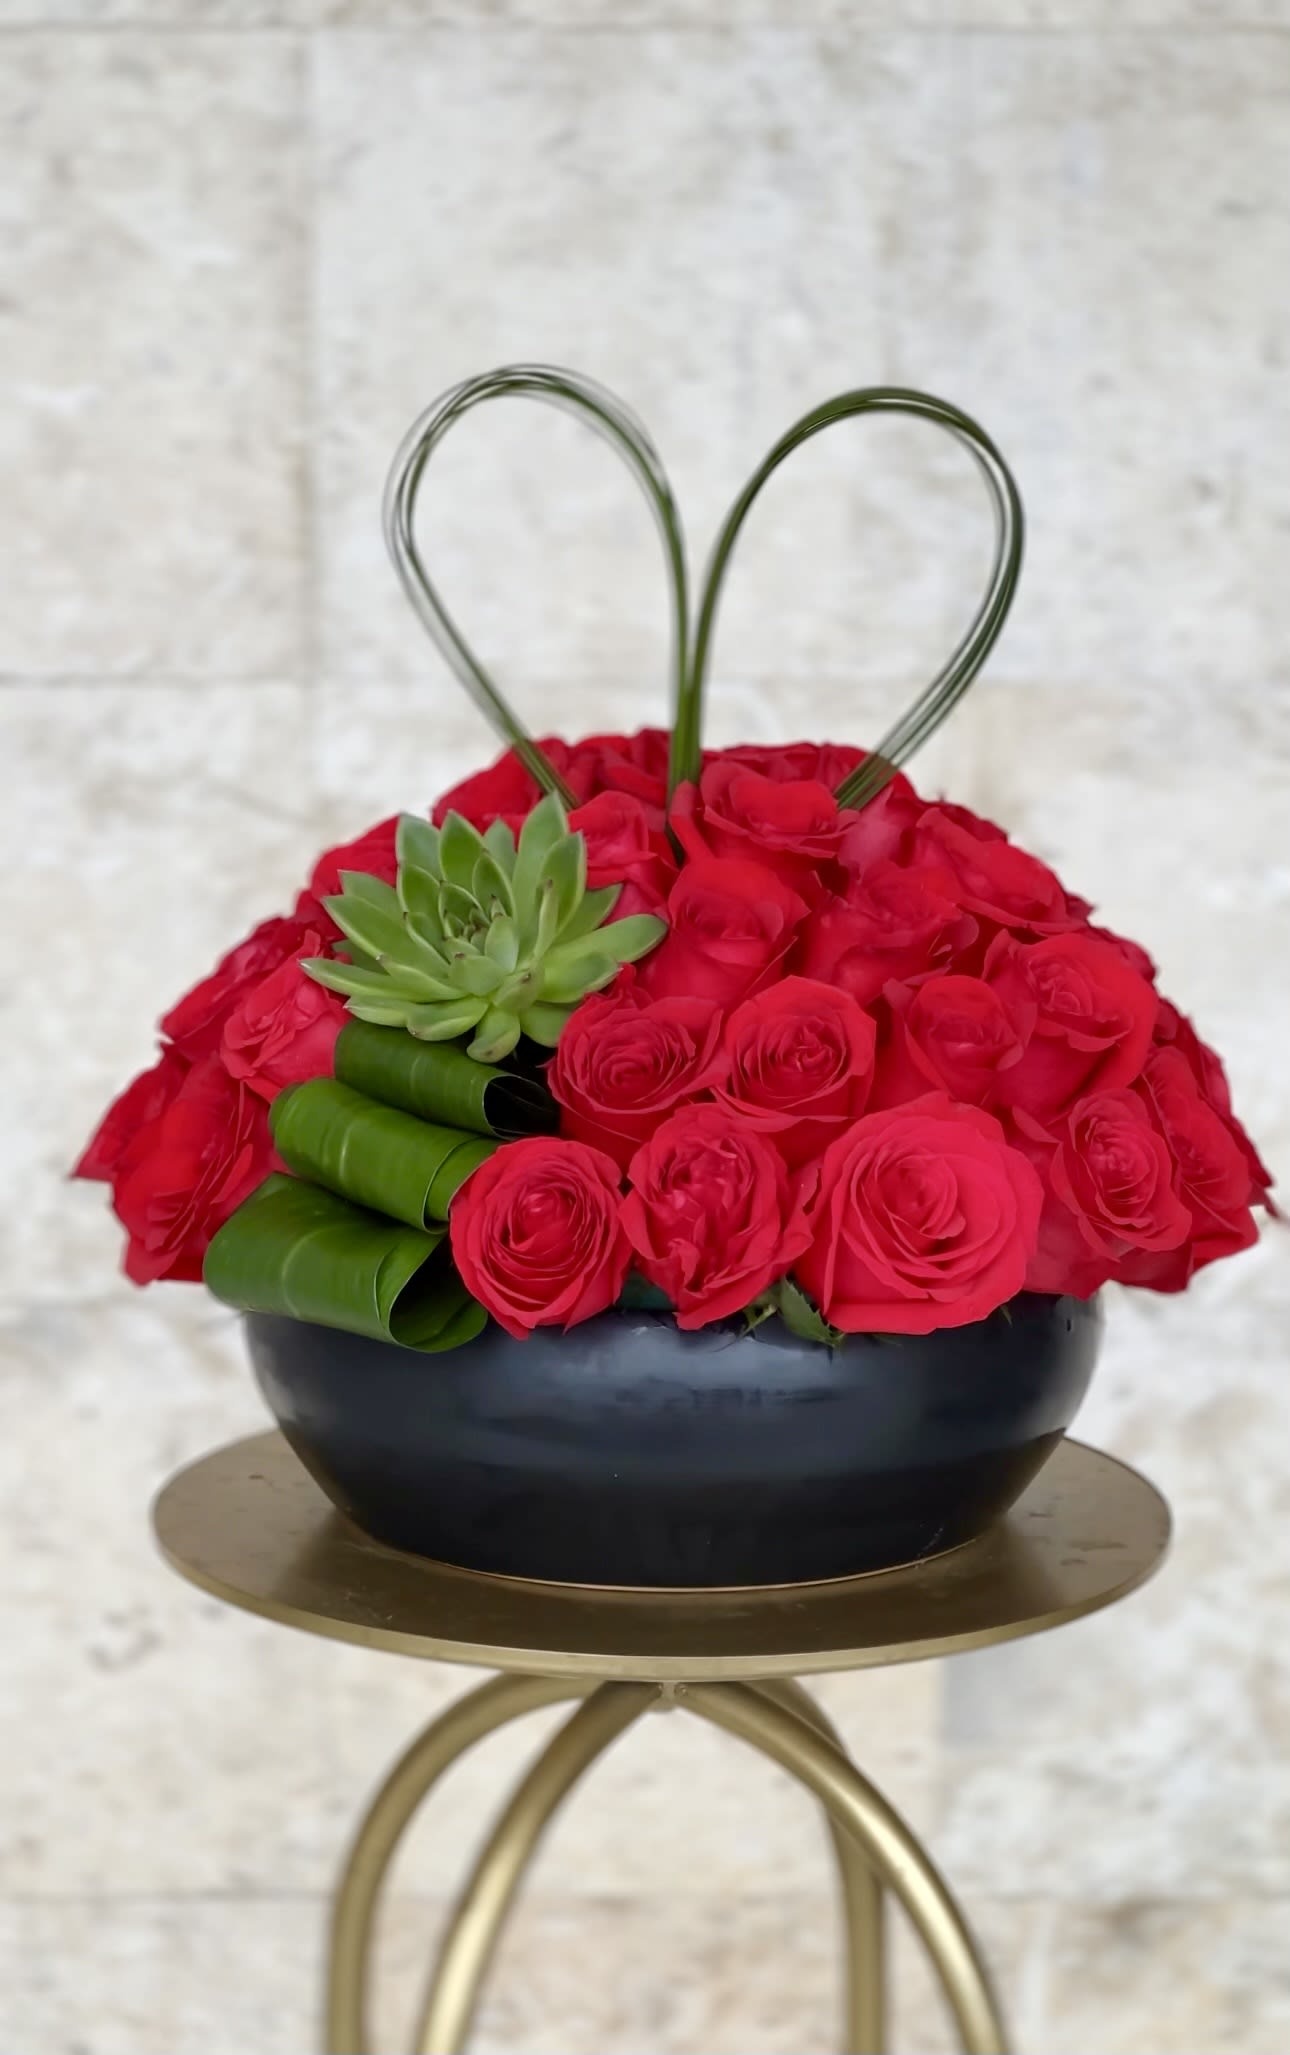 Lovely Blooms - We feel so romantic and inspired by all these lovely blooms! The perfect choice to show your love. Filled with the season blooms.